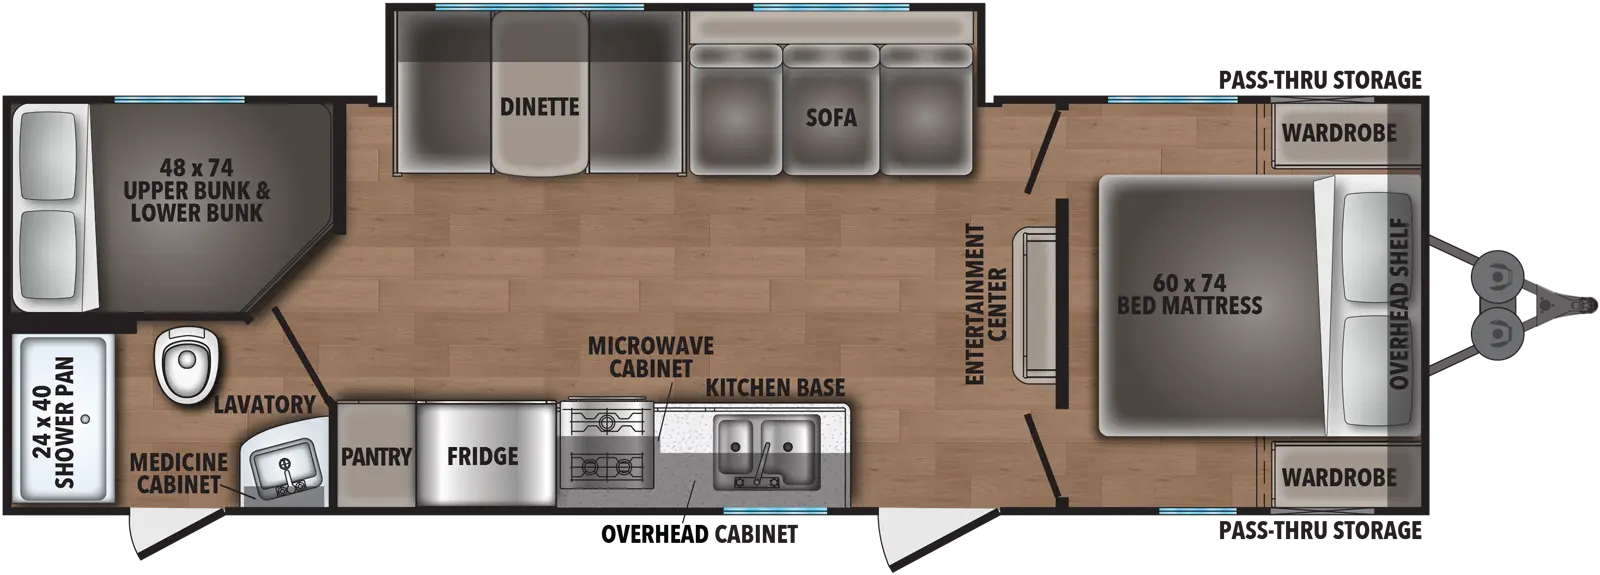 The 26DB has one slide out on the off-door side and two entry doors on the door side. Interior layout from front to back: front bedroom with side-facing queen bed; kitchen living dining area with off door side slide out containing sofa and dinette; entertainment center; kitchen with double basin sink, overhead cabinet, cook top stove, microwave cabinet, and refrigerator; bathroom with exterior access; and rear bedroom with bunks.